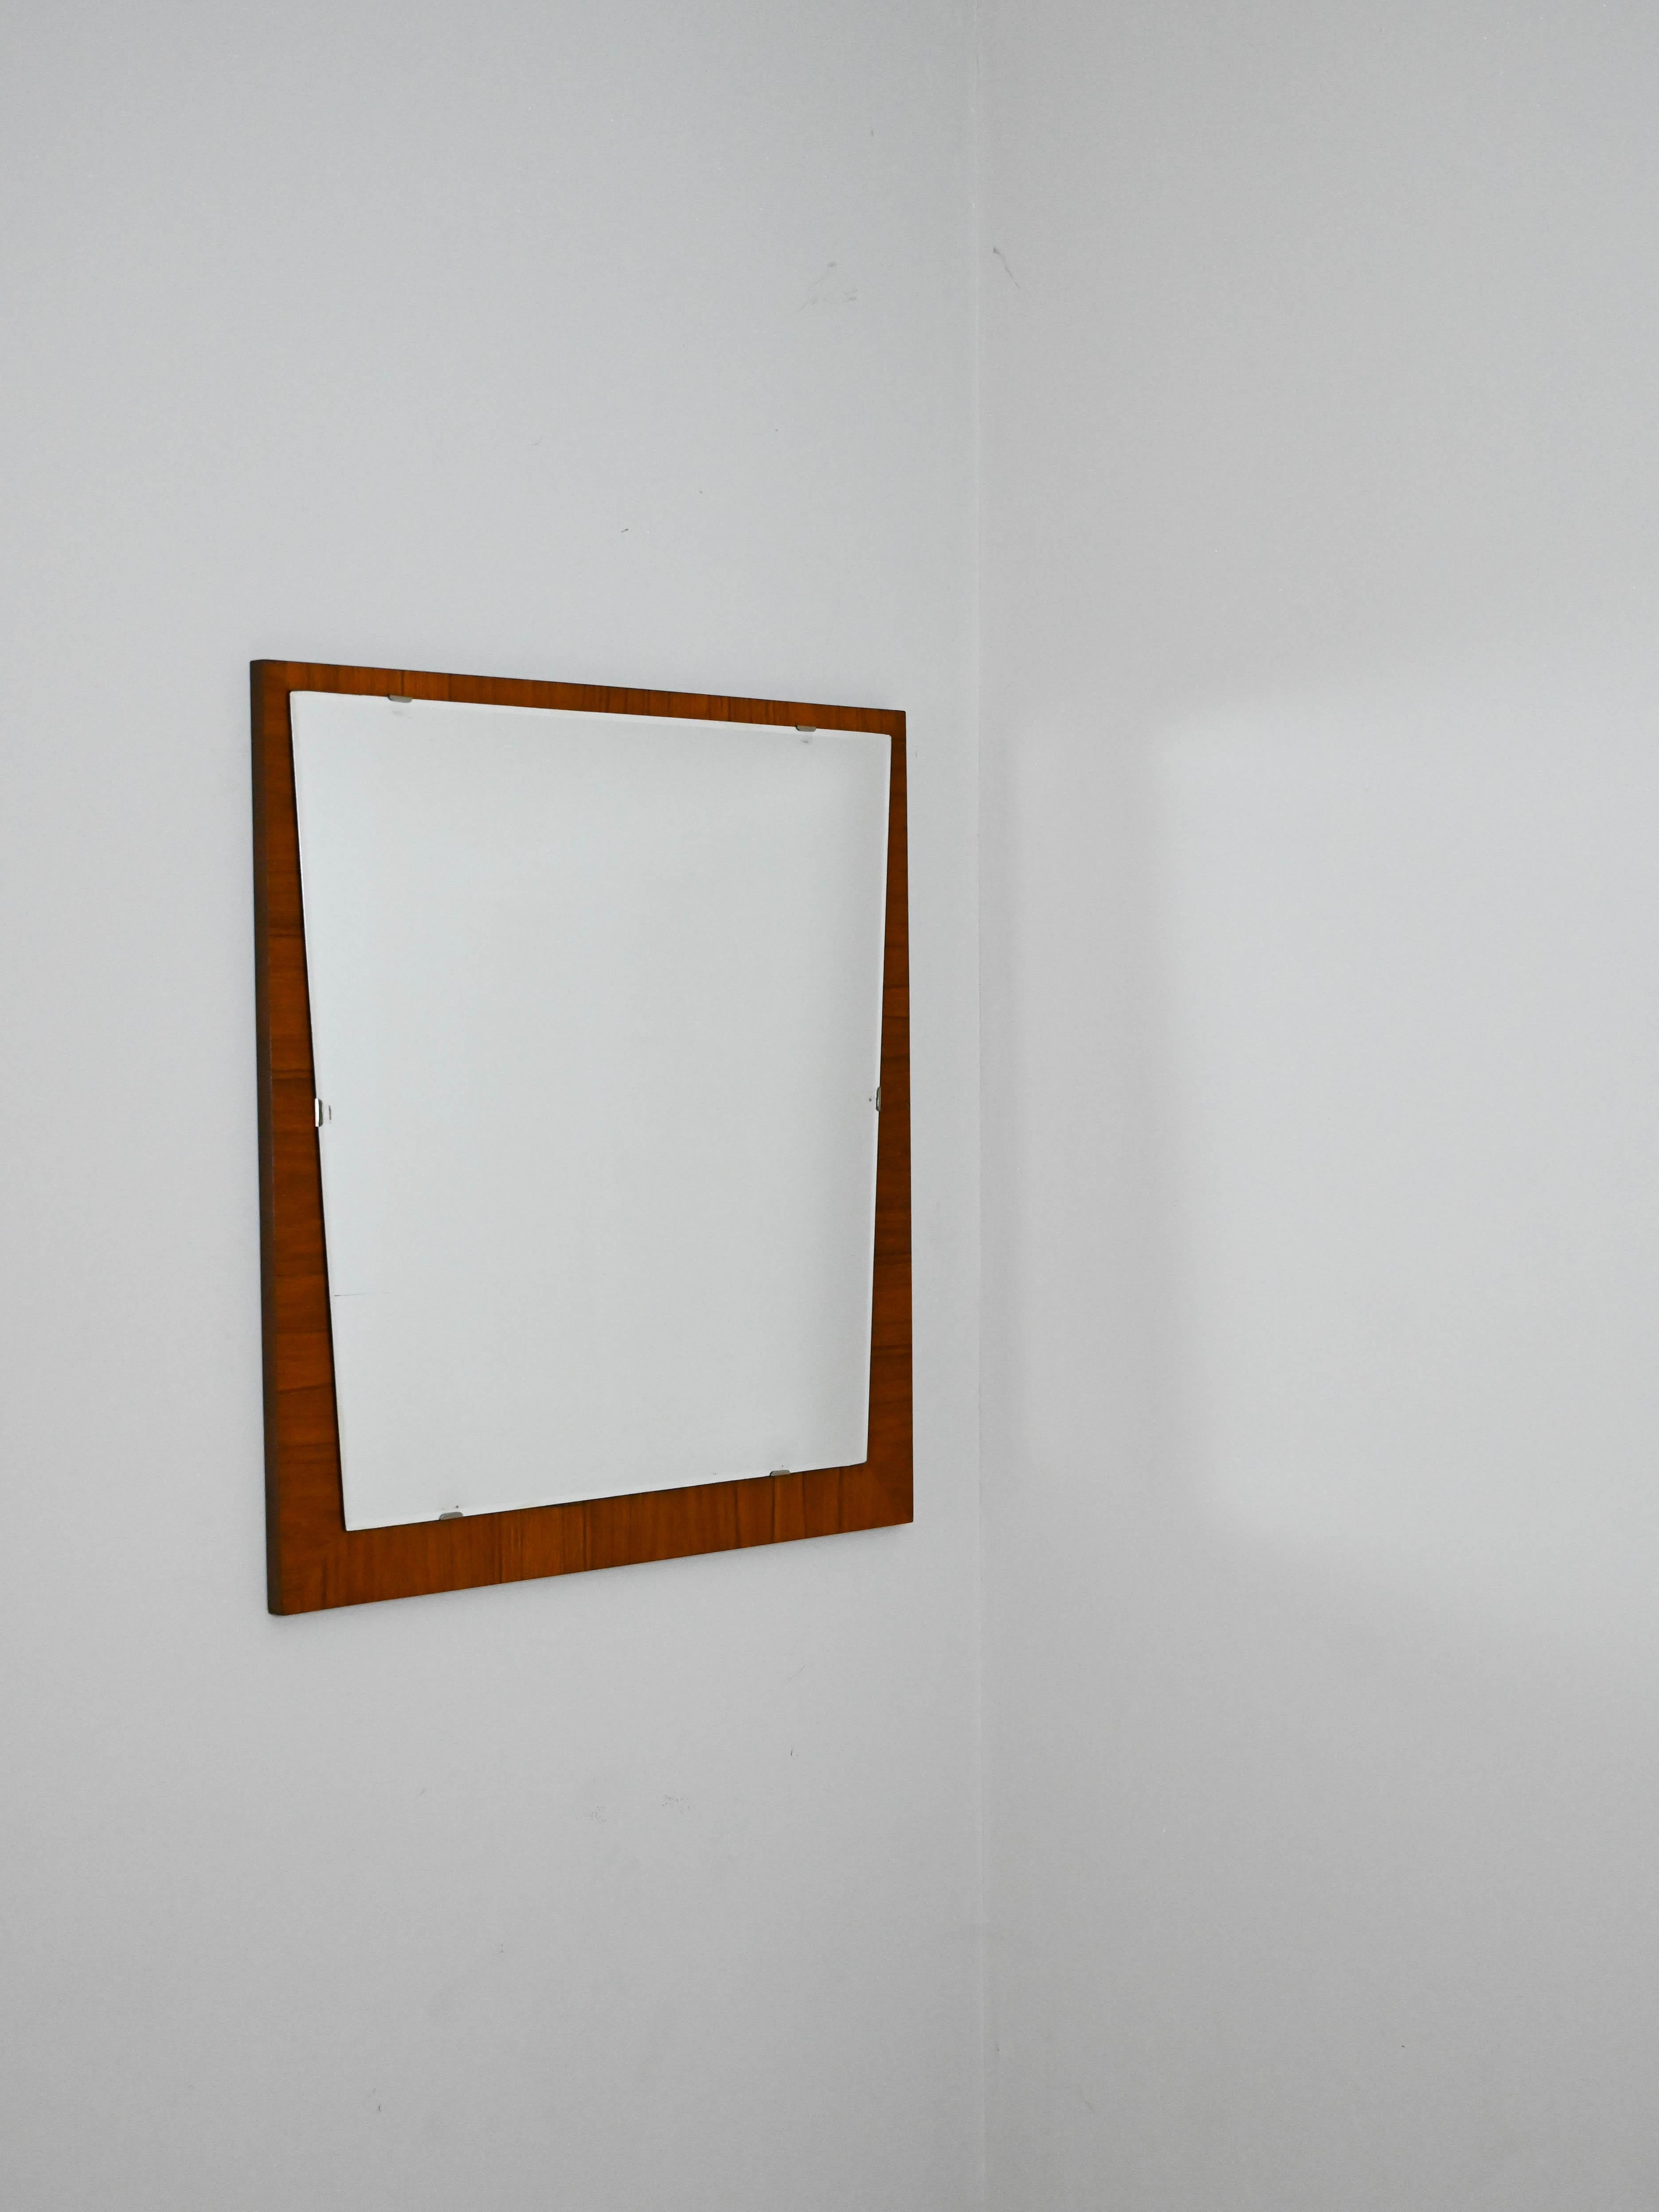 Scandinavian mirror from the 1960s.

The square teak frame is made special by the trapezoid shape of the mirror.
This Scandinavian piece of furniture will be able to recreate a unique corner with modern taste.

Good condition. The mirror may